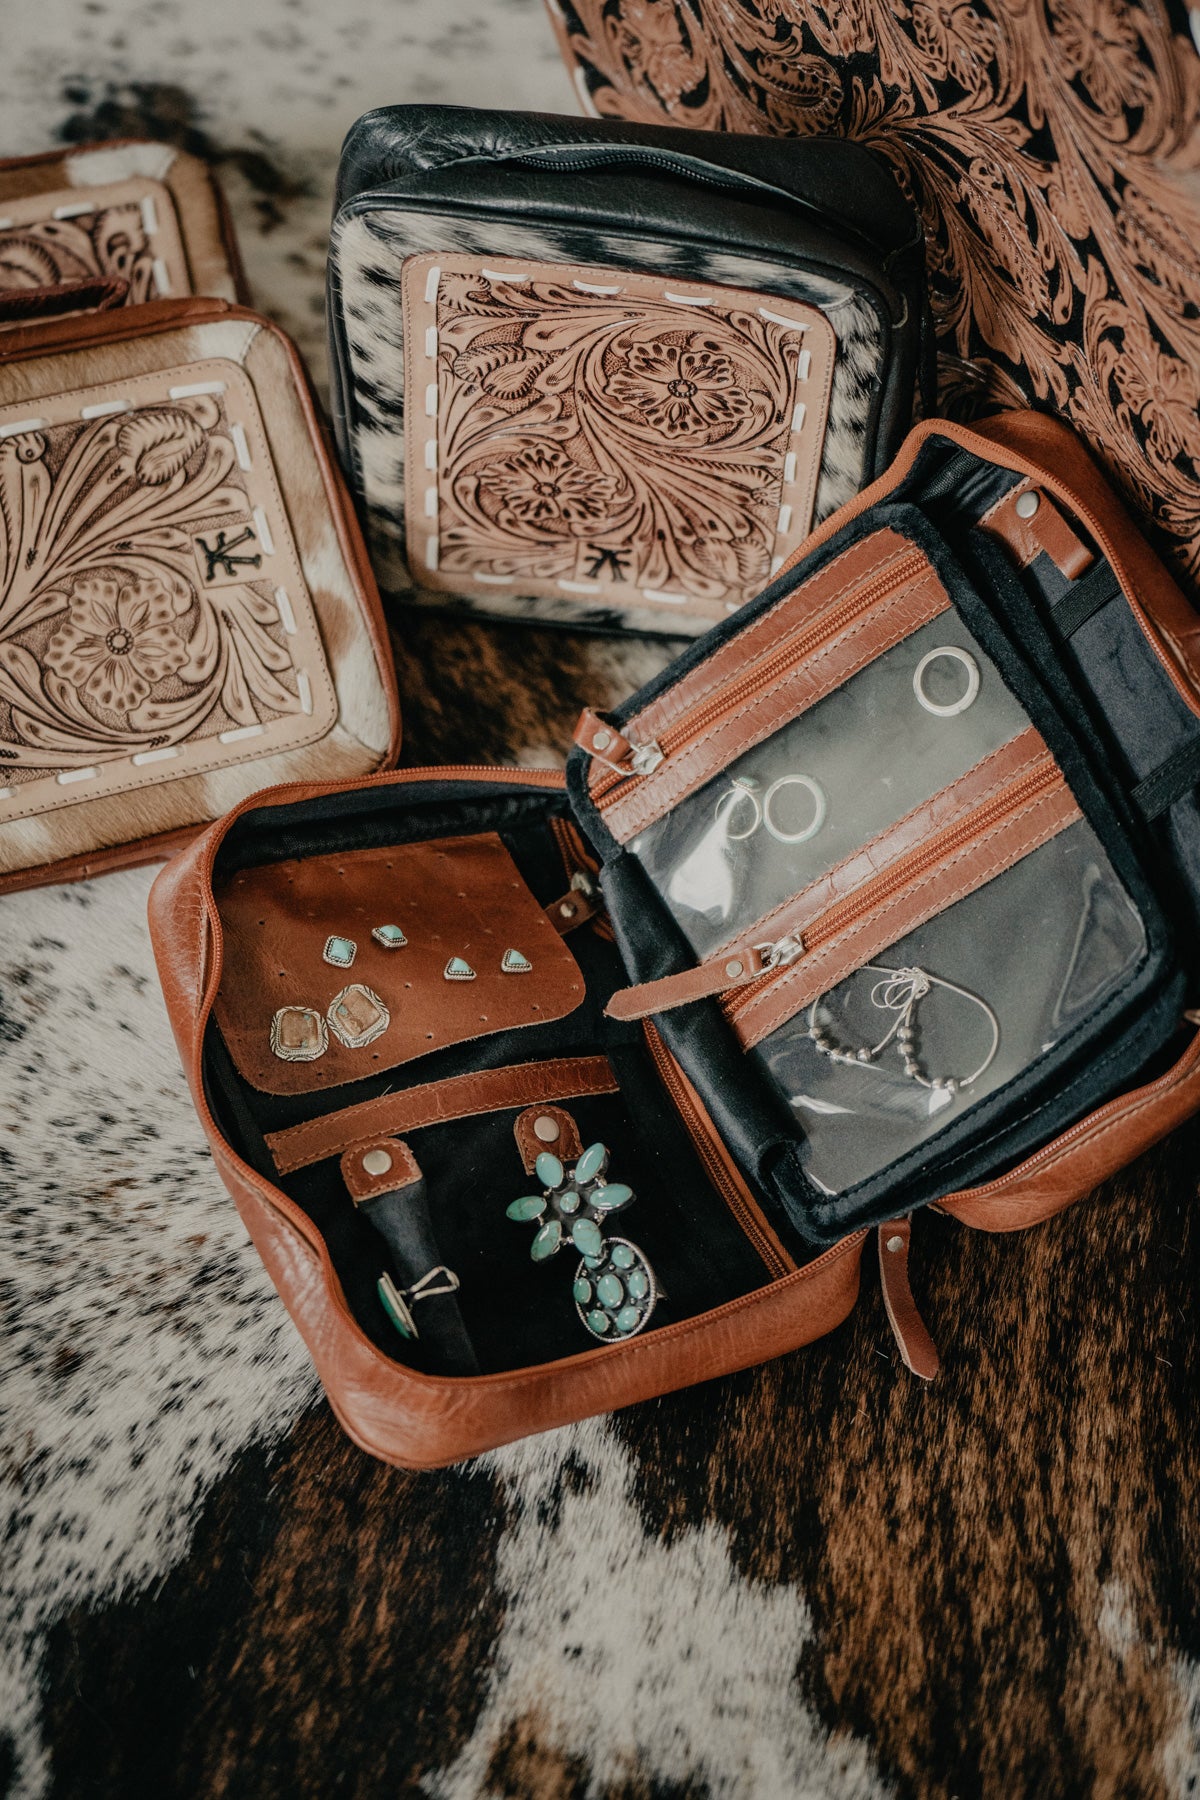 Jewelry 'Book' Storage and Travel Case